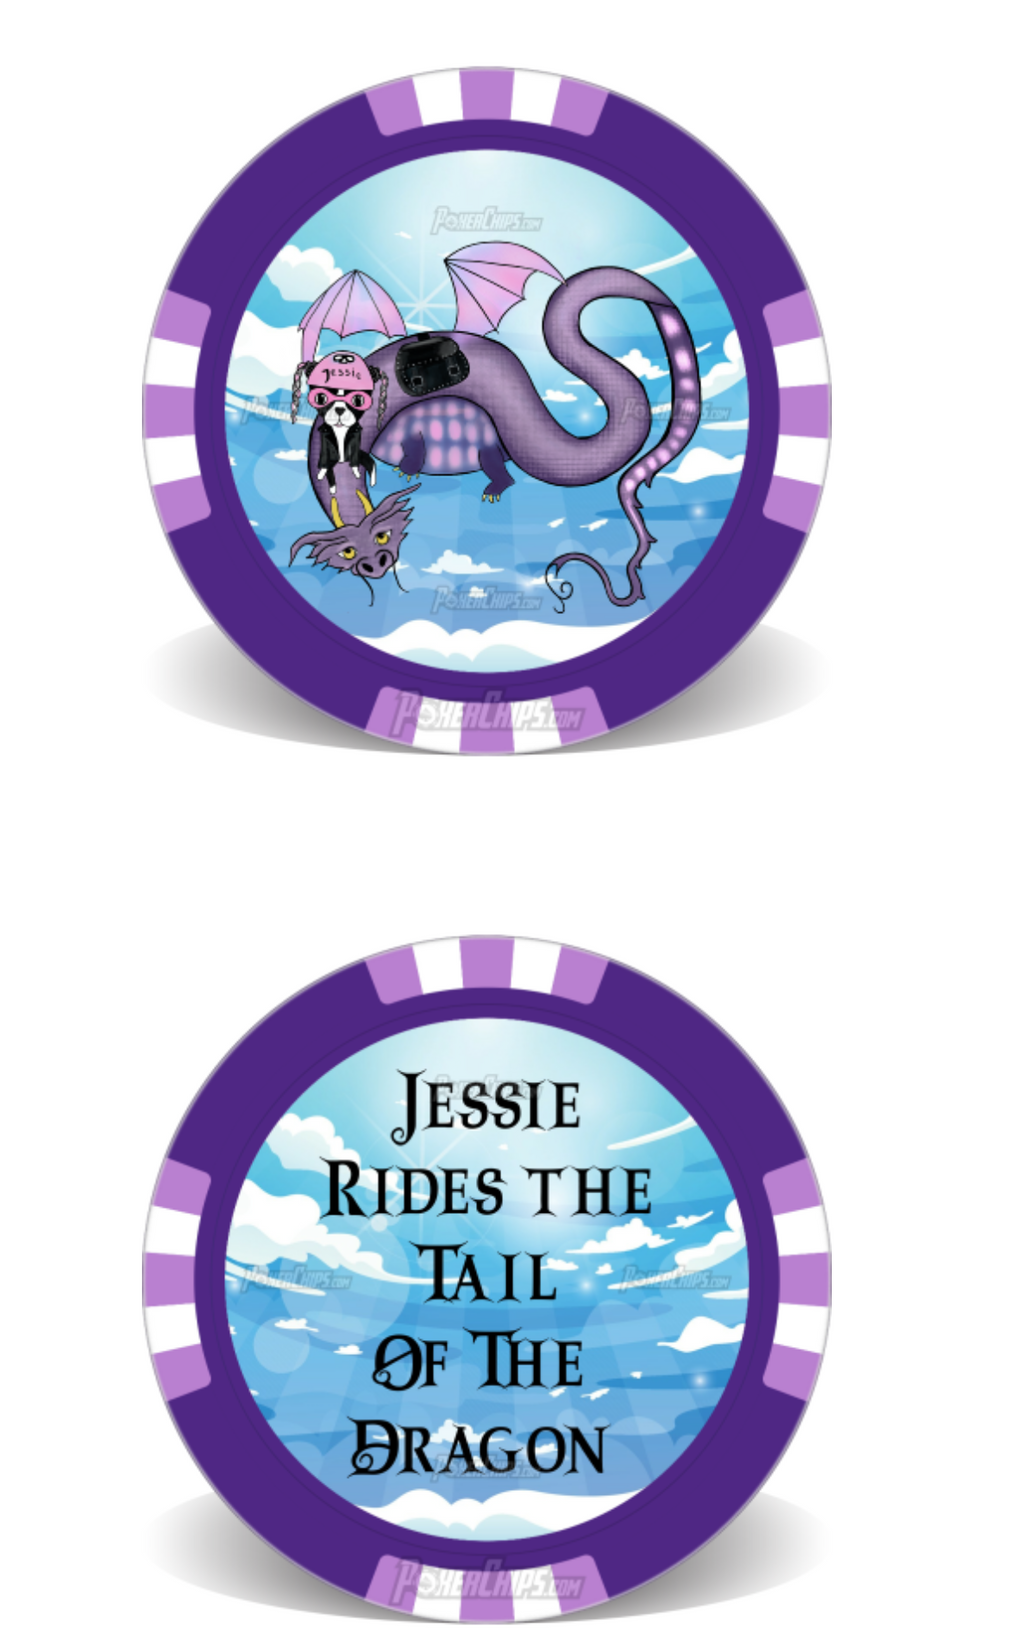 Jessie Rides Tail of the Dragon: Poker Chip